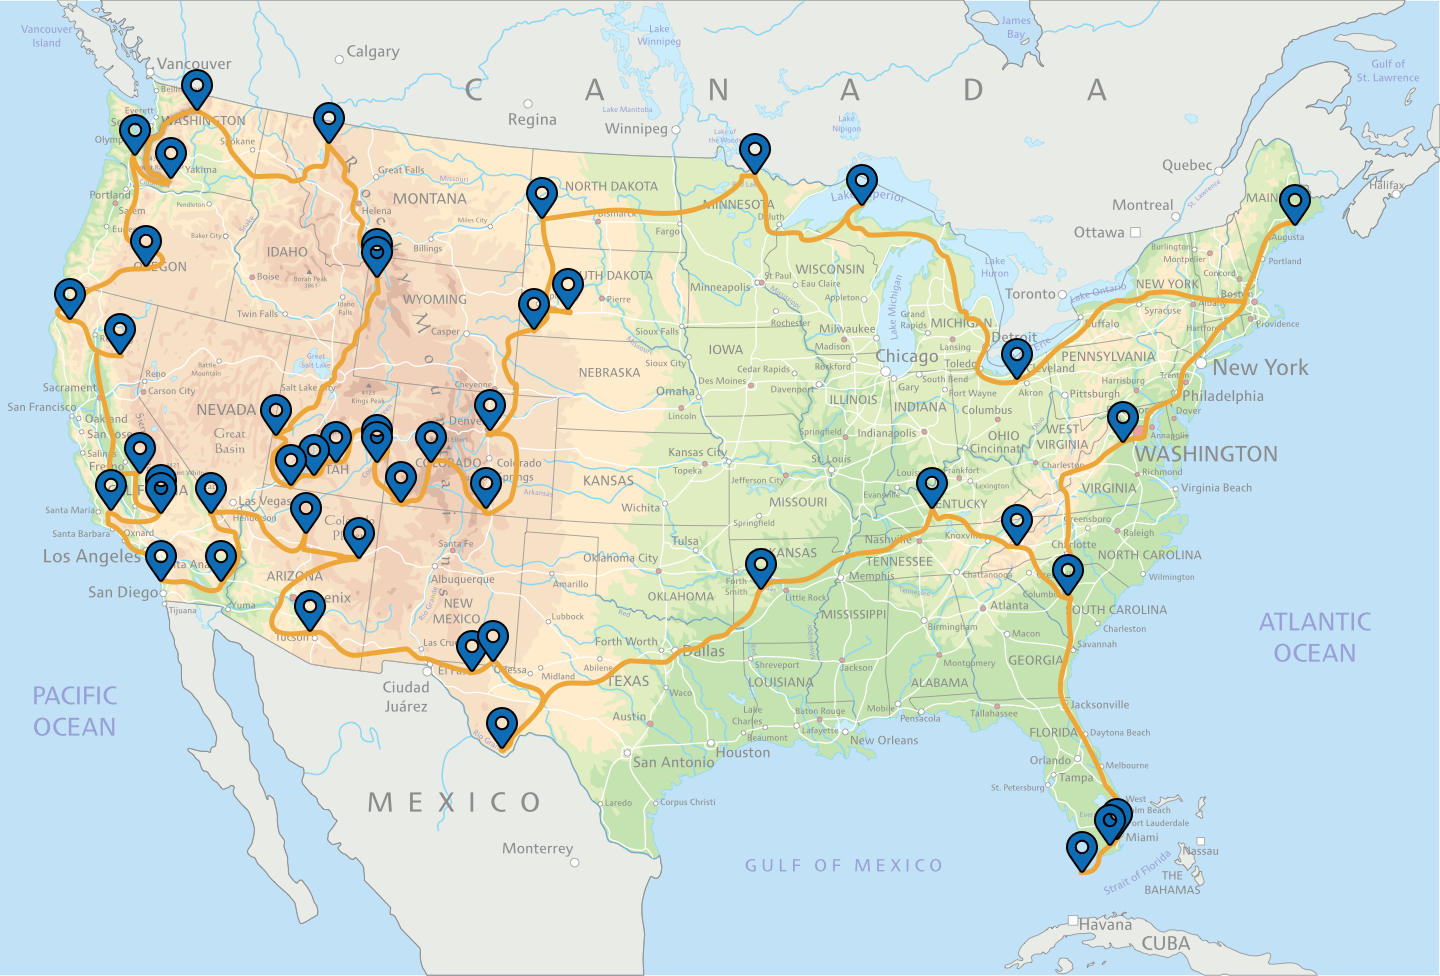 The Ultimate Driving Route to See Some of the Most Popular National Parks!